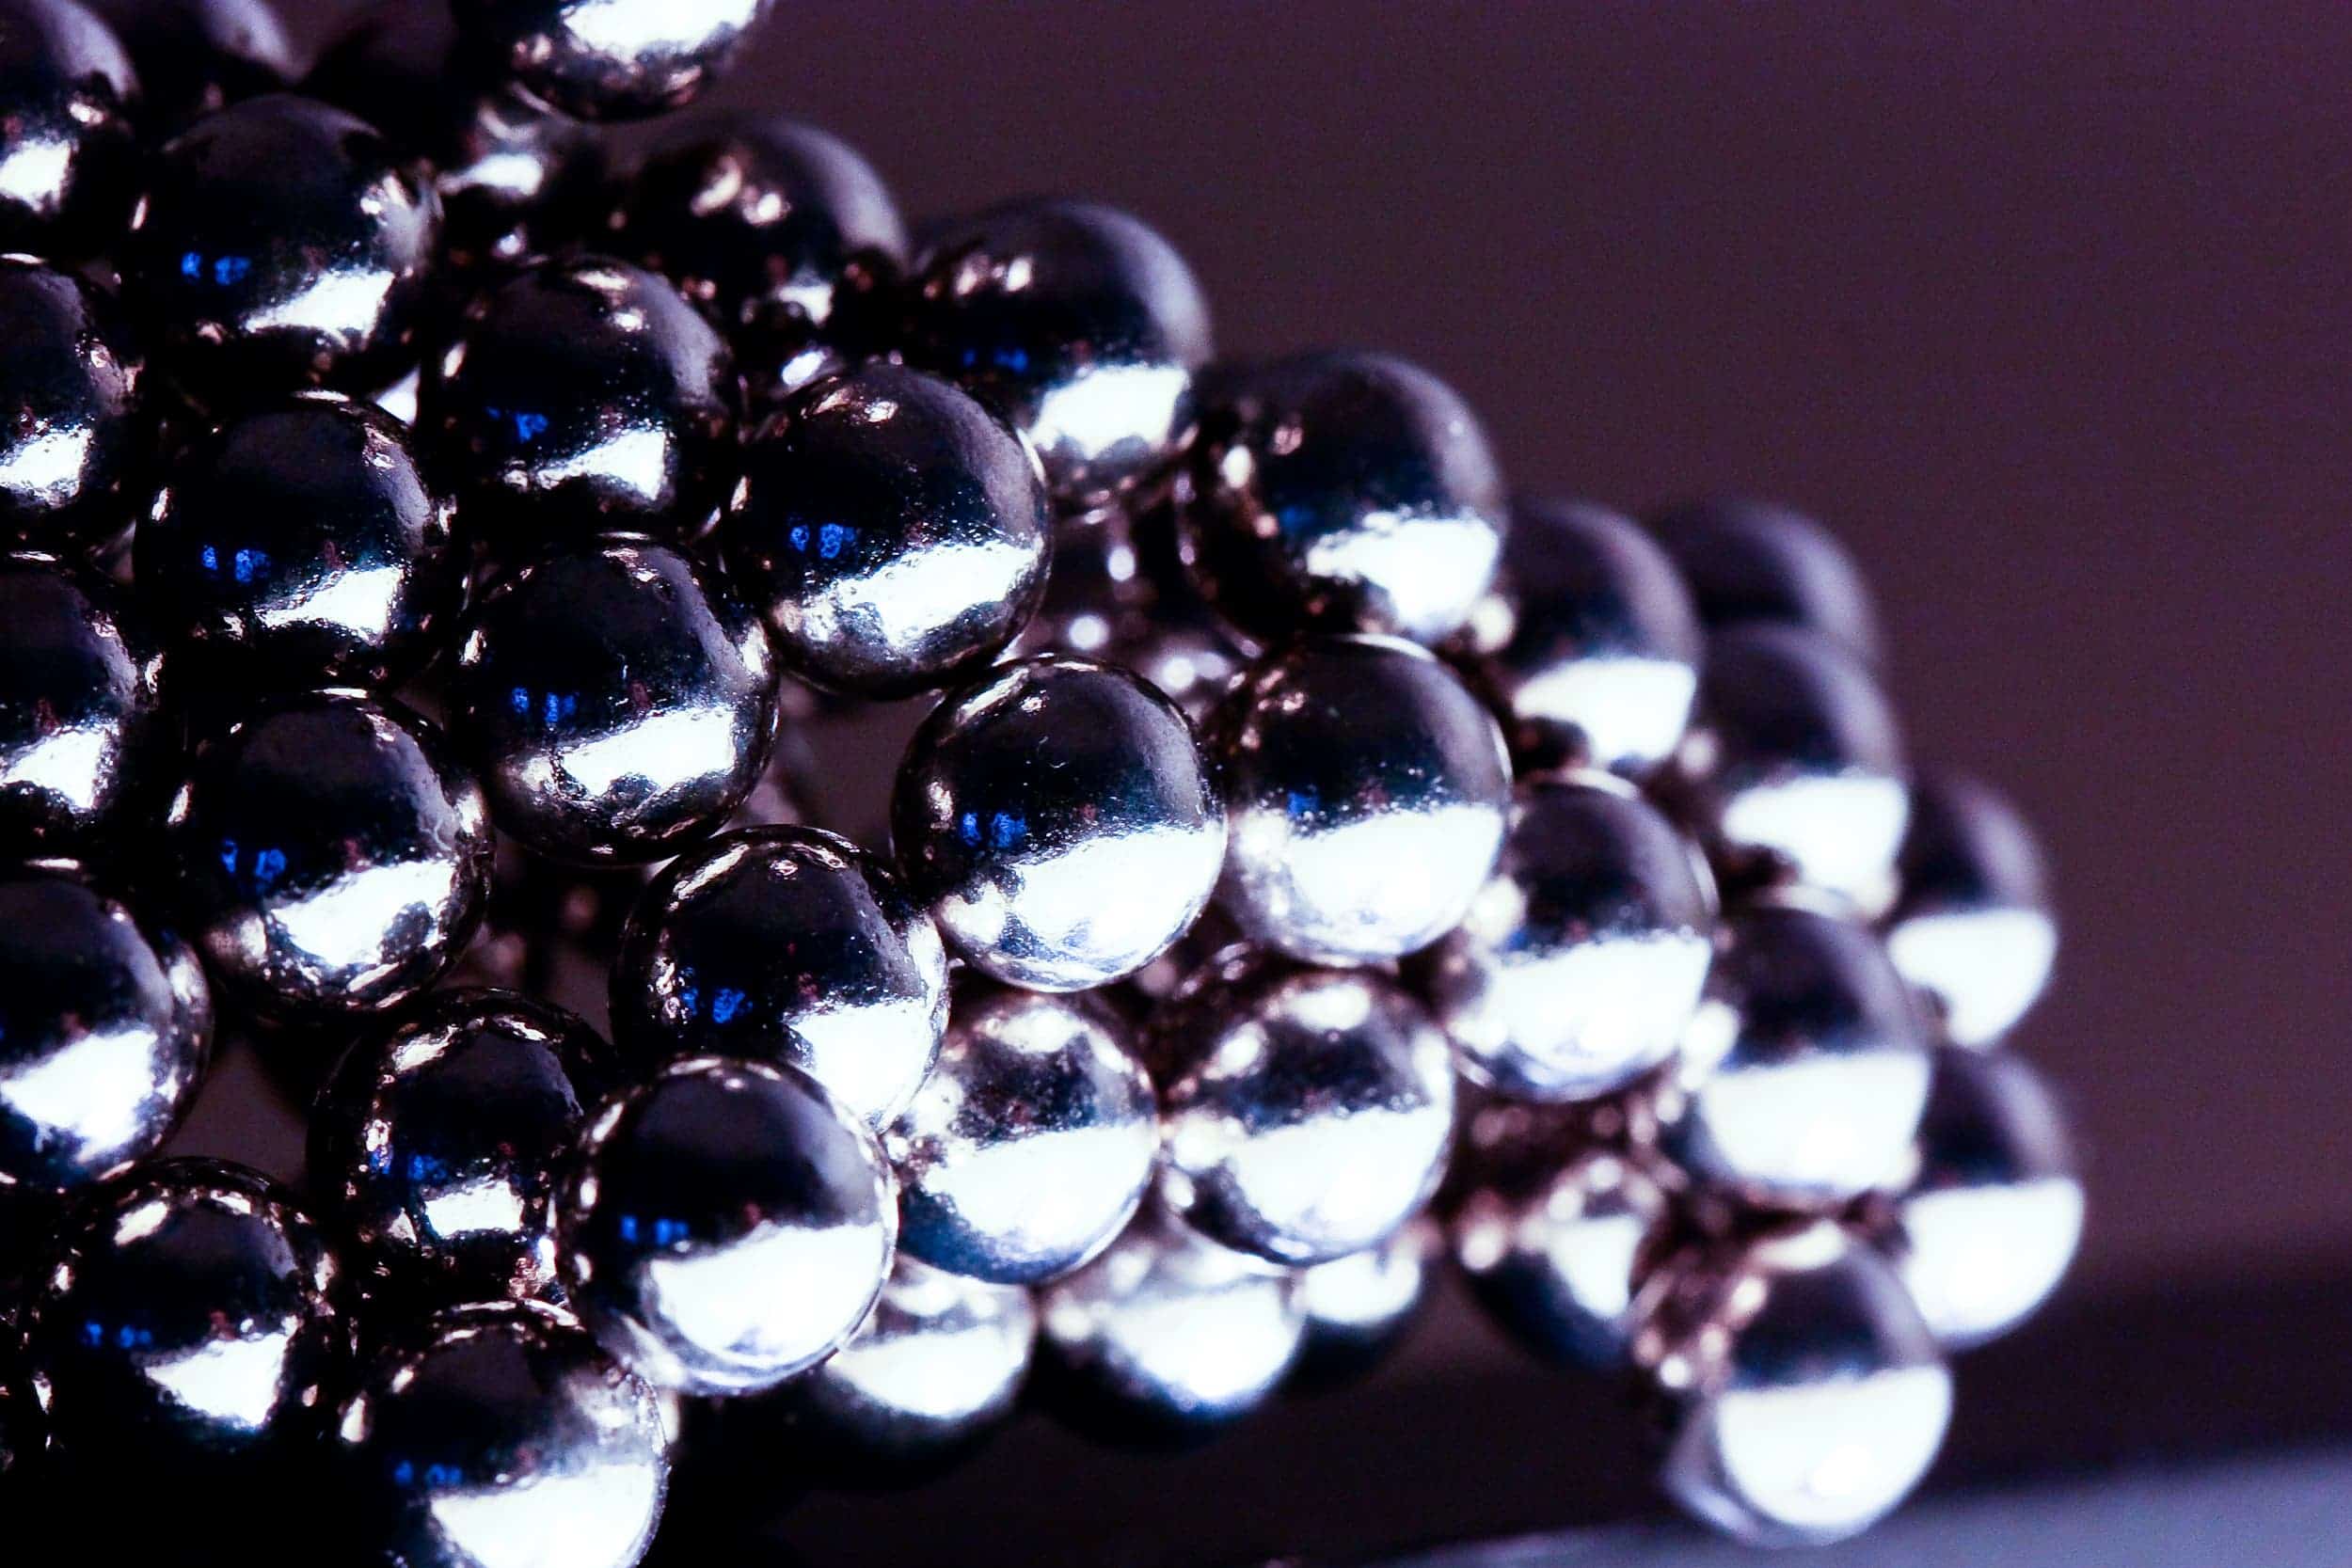 Conventional magnets could be revolutionized by this new discovery. Credit: Bart Heird (Flickr)